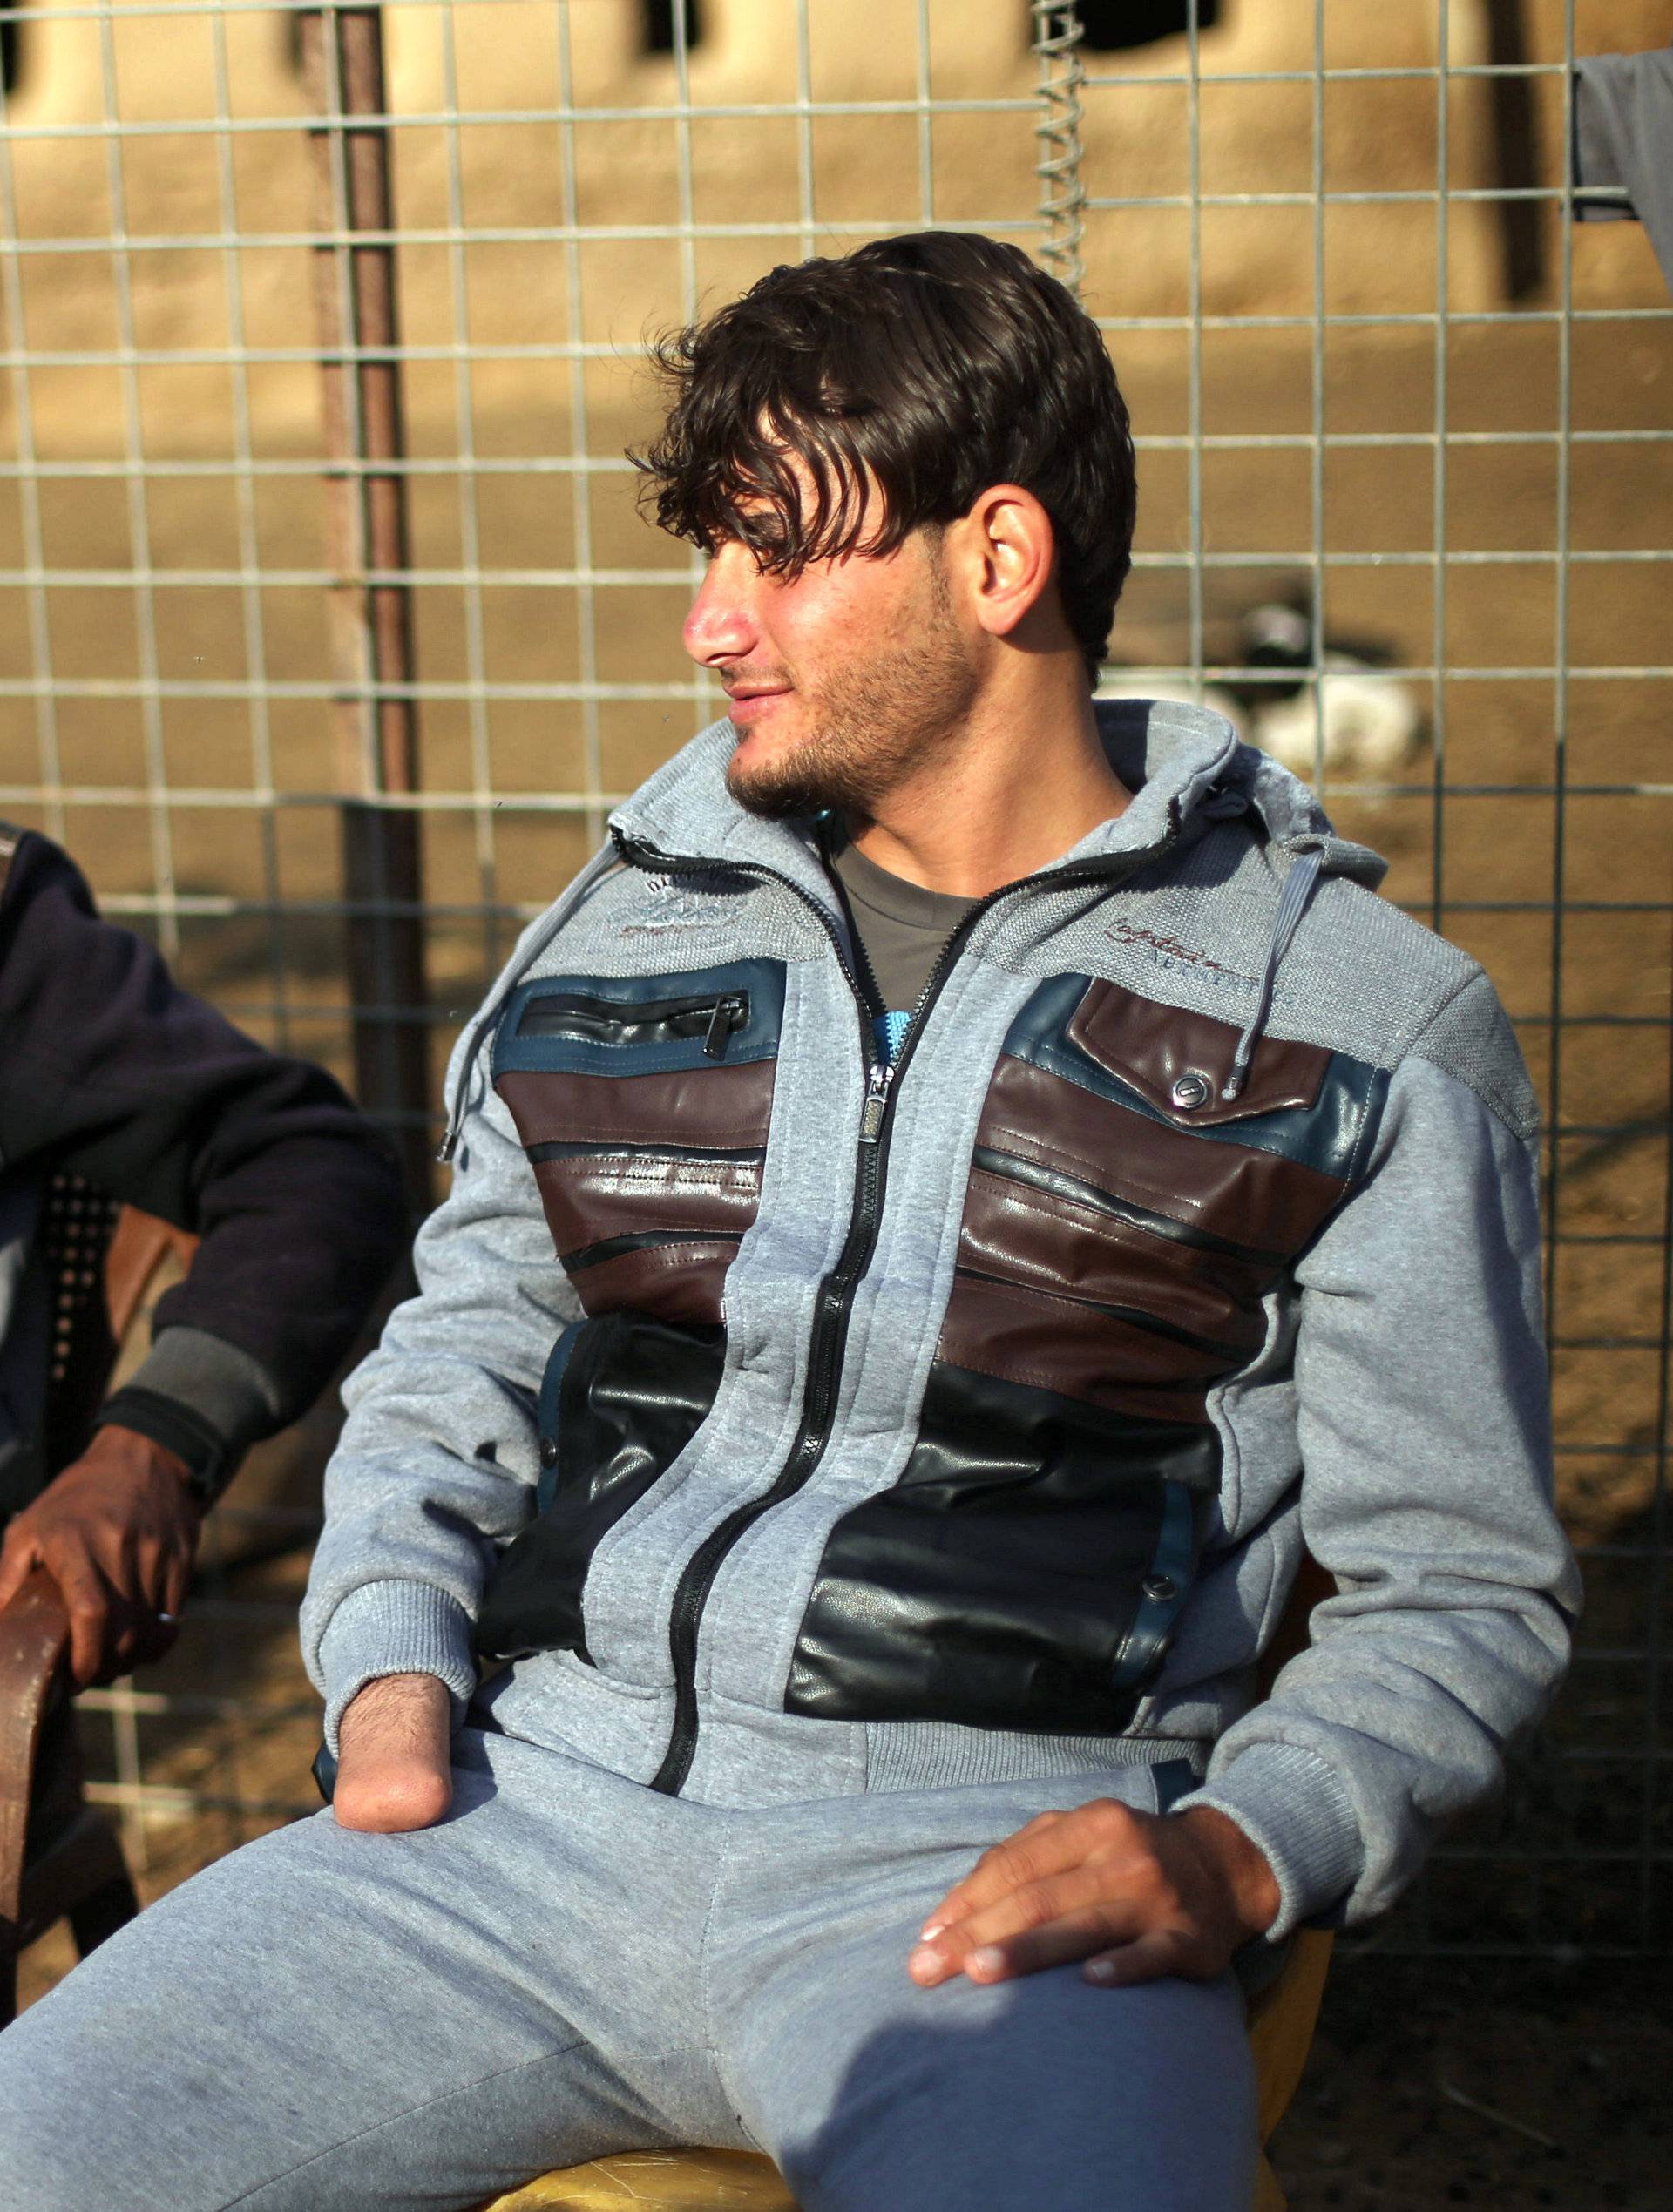 Azad Hassan and his brother Mohammad, whose hands were chopped off by Islamic State militants, sit next to each other at Nimrud village, south of Mosul